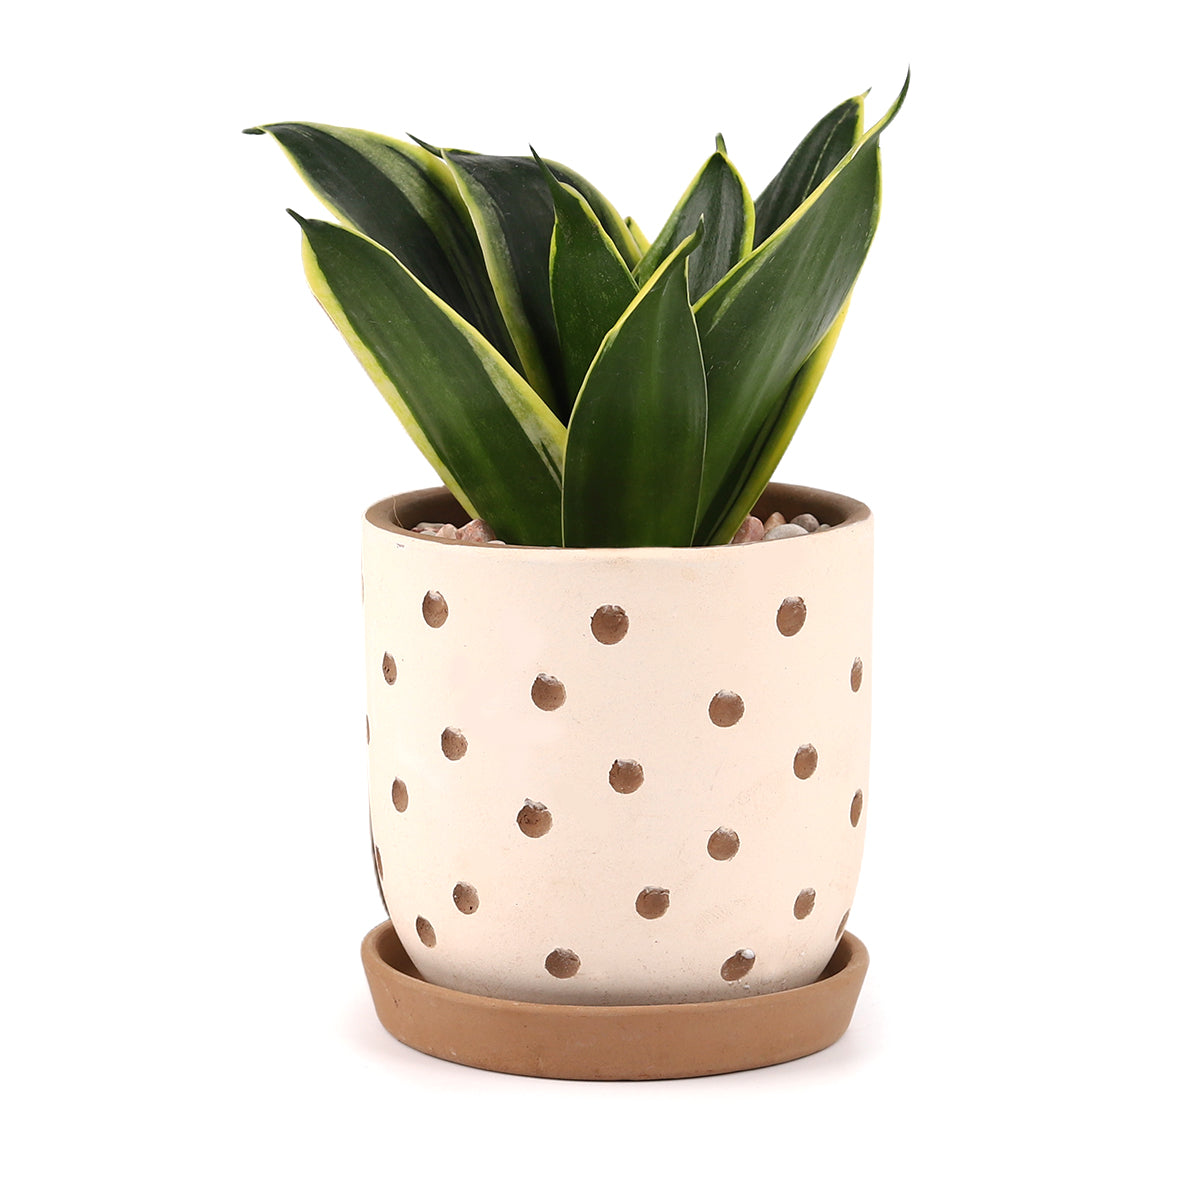 Clay White Polka Dot Pattern Pot 4 inch/ 5.5 inch for sale online, Decorative Terracotta Pot with Drainage Holes and Saucer for Succulent Houseplant & Flower